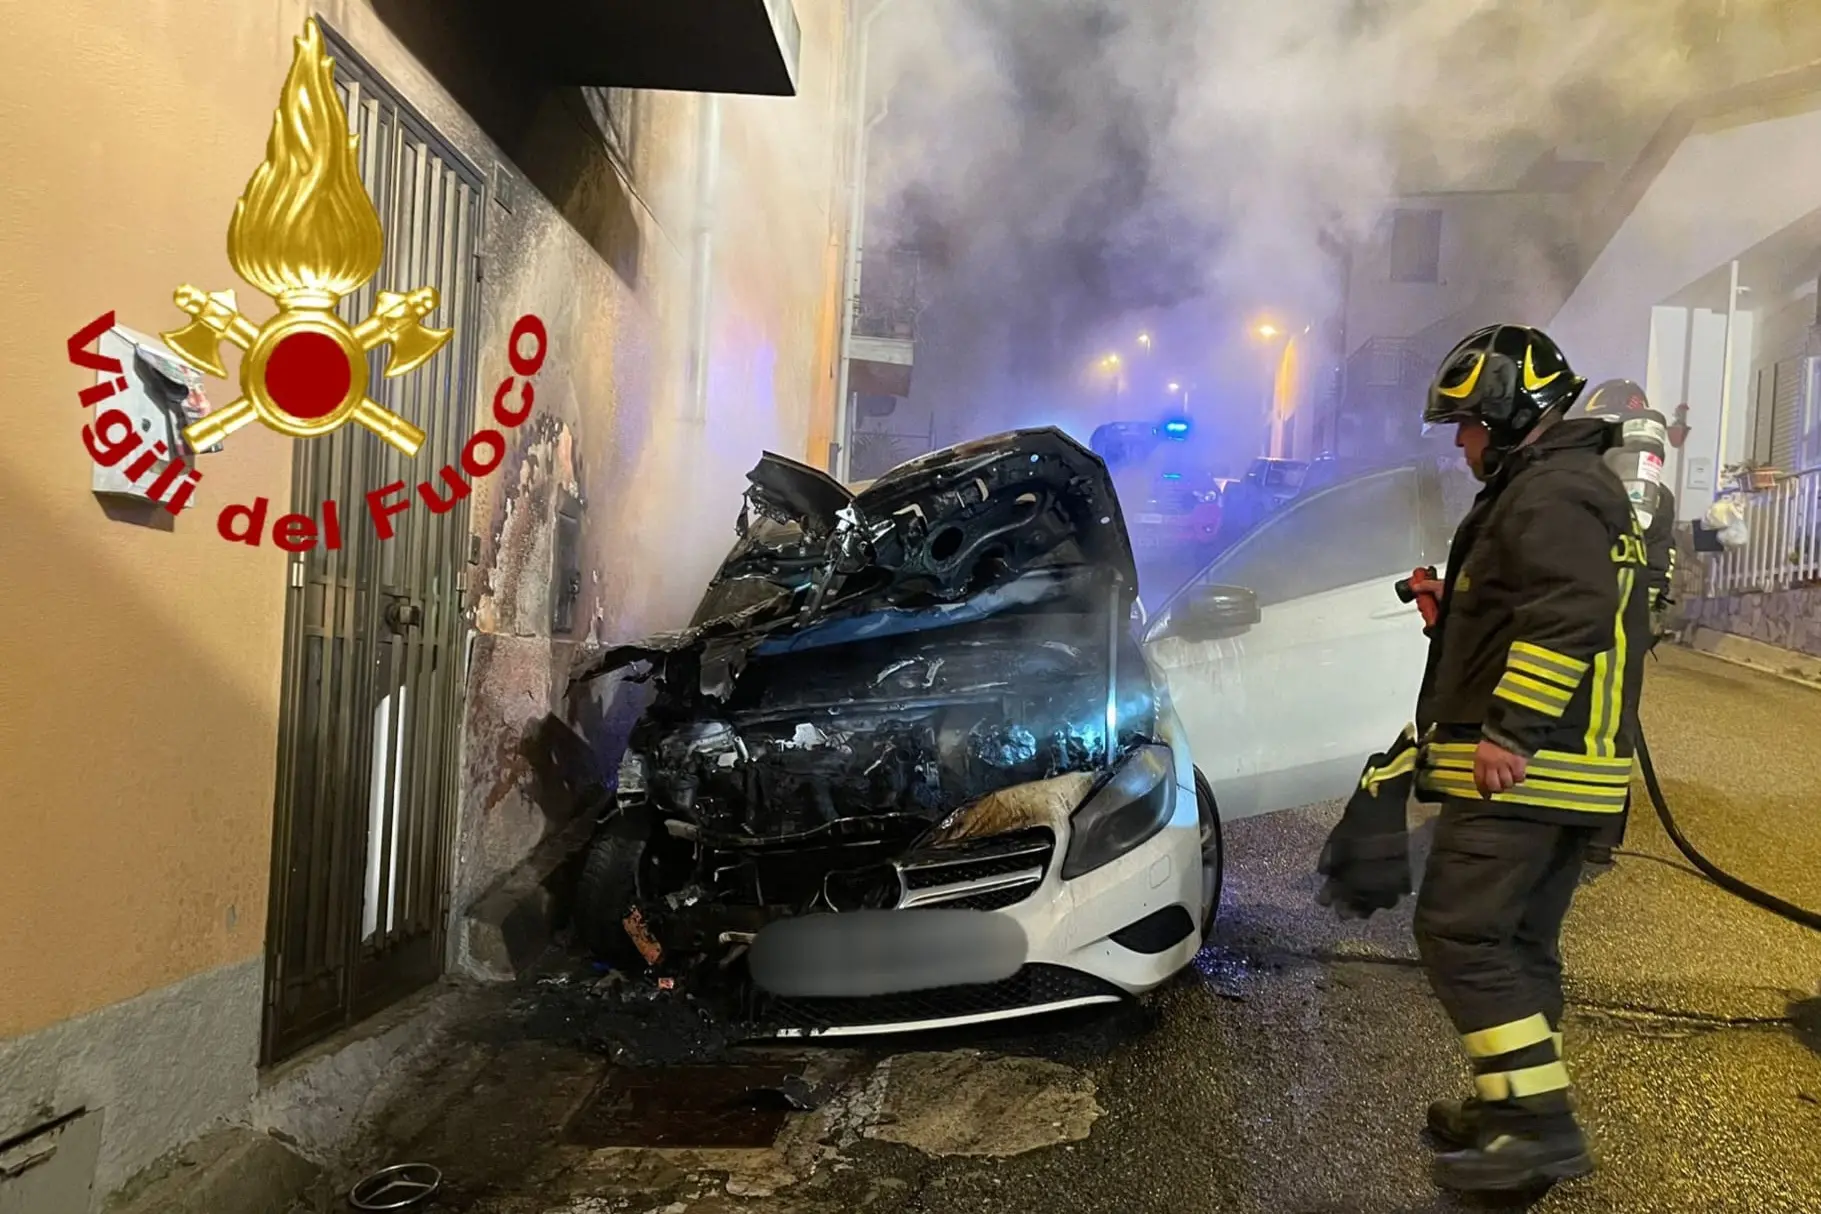 The car on fire (Firefighter photo)